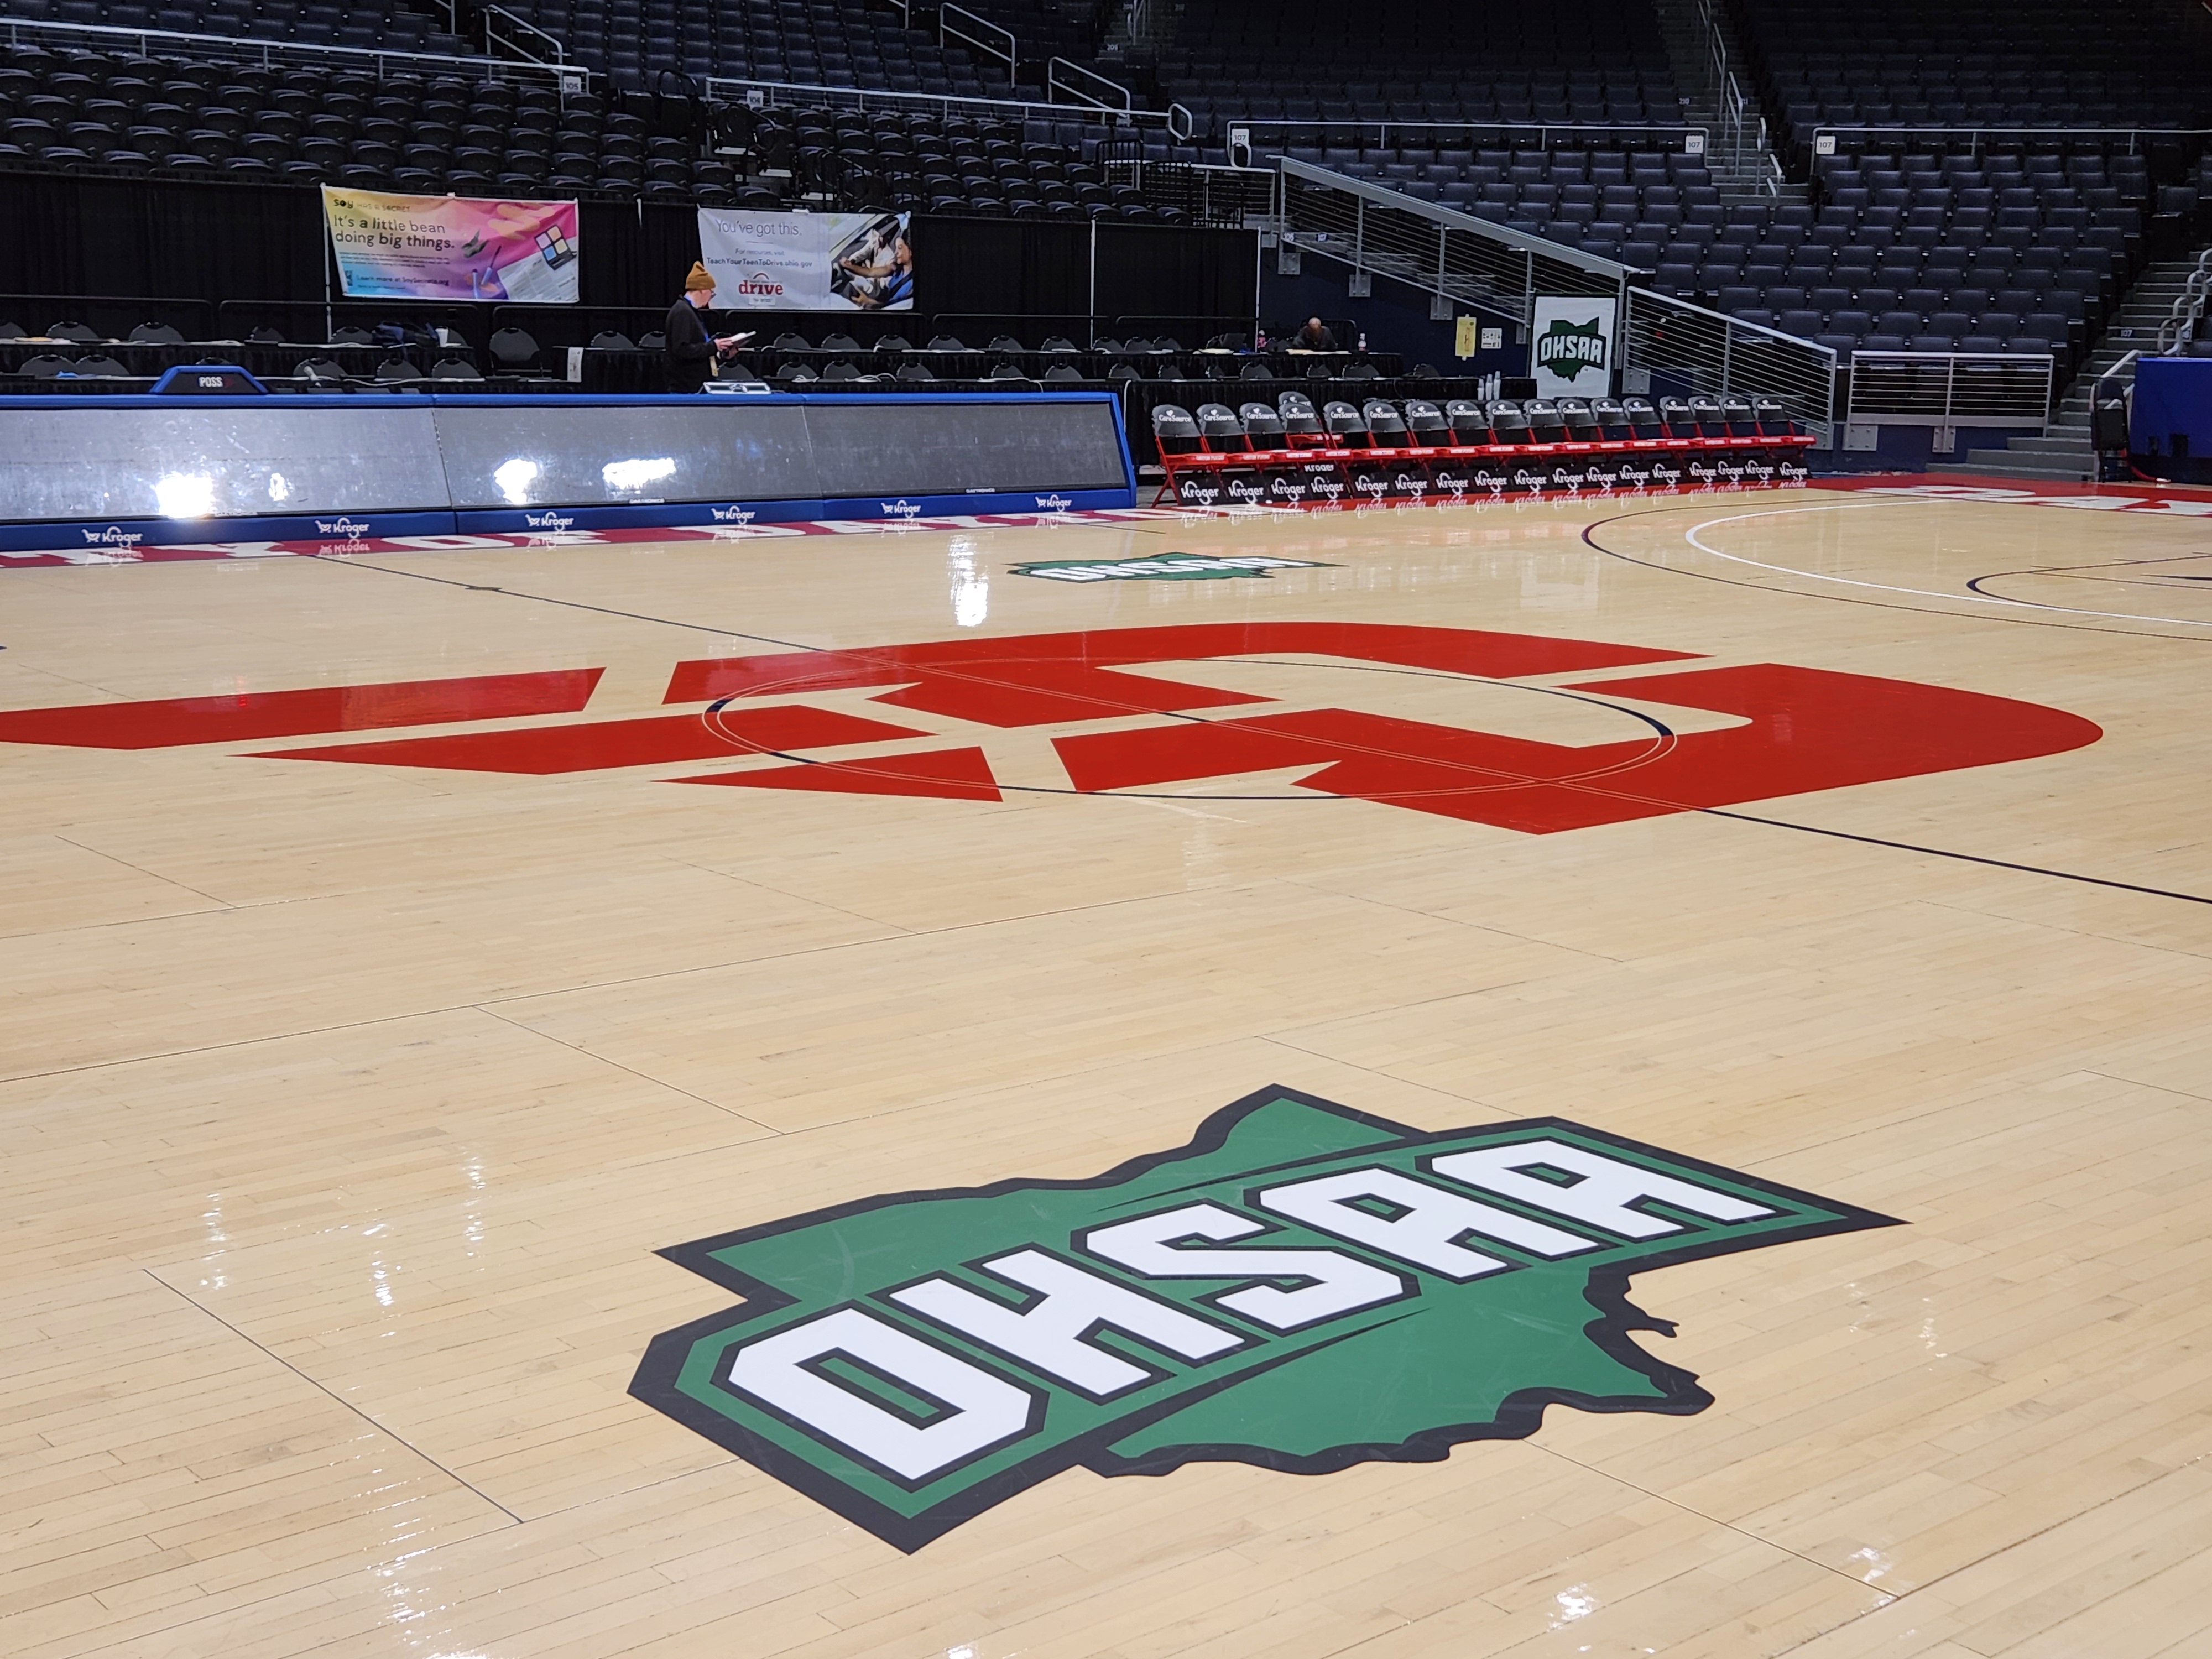 The court at The University of Dayton Arena is ready for the OHSAA state tournament.